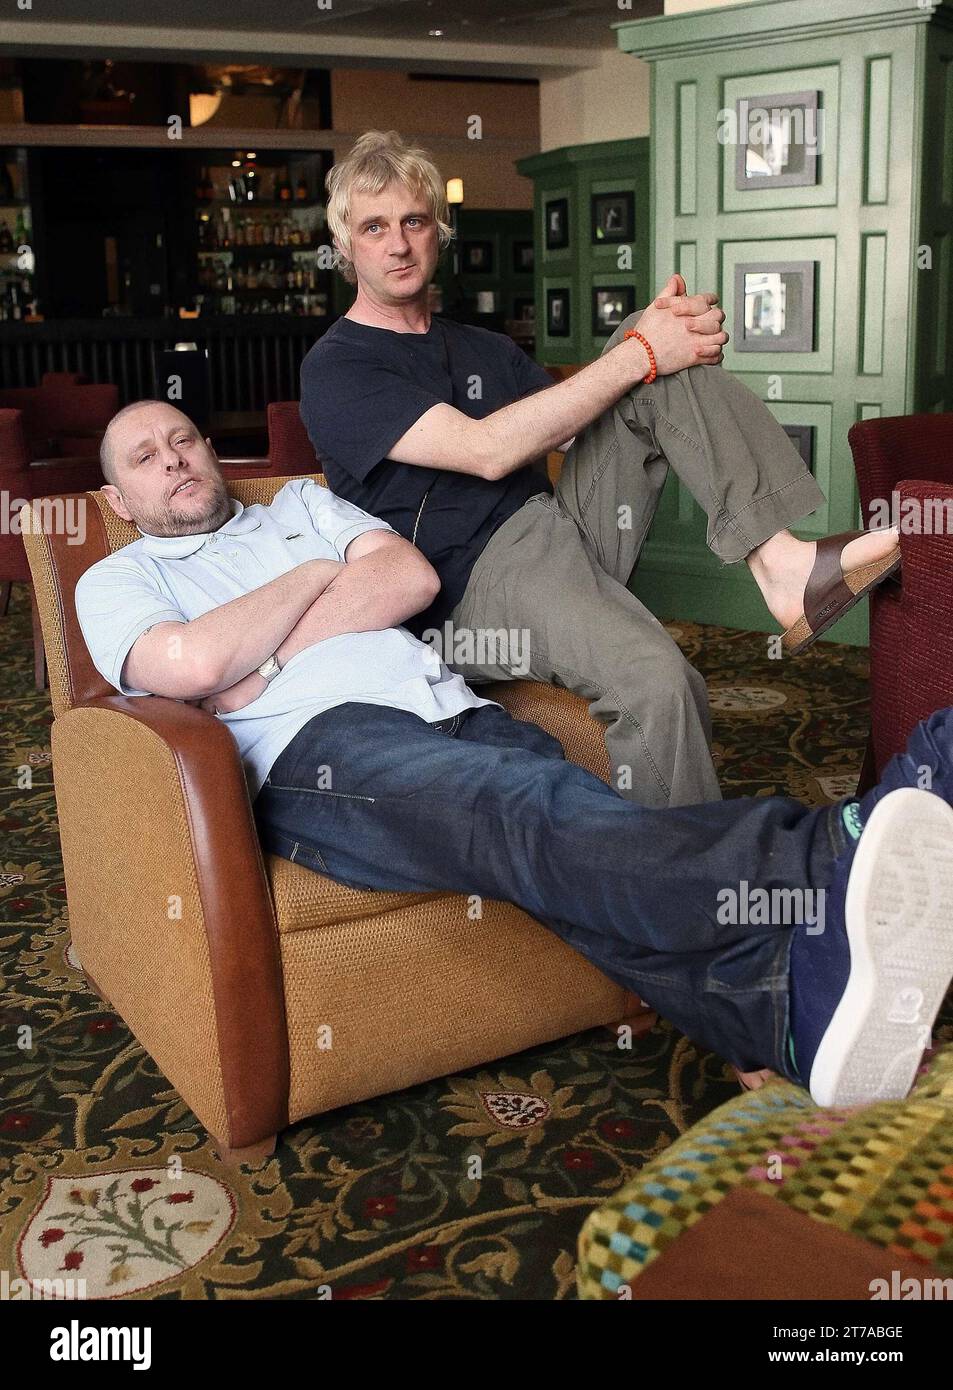 Shaun Ryder and Gary Whelan from the Manchester band The Happy Mondays. Stock Photo